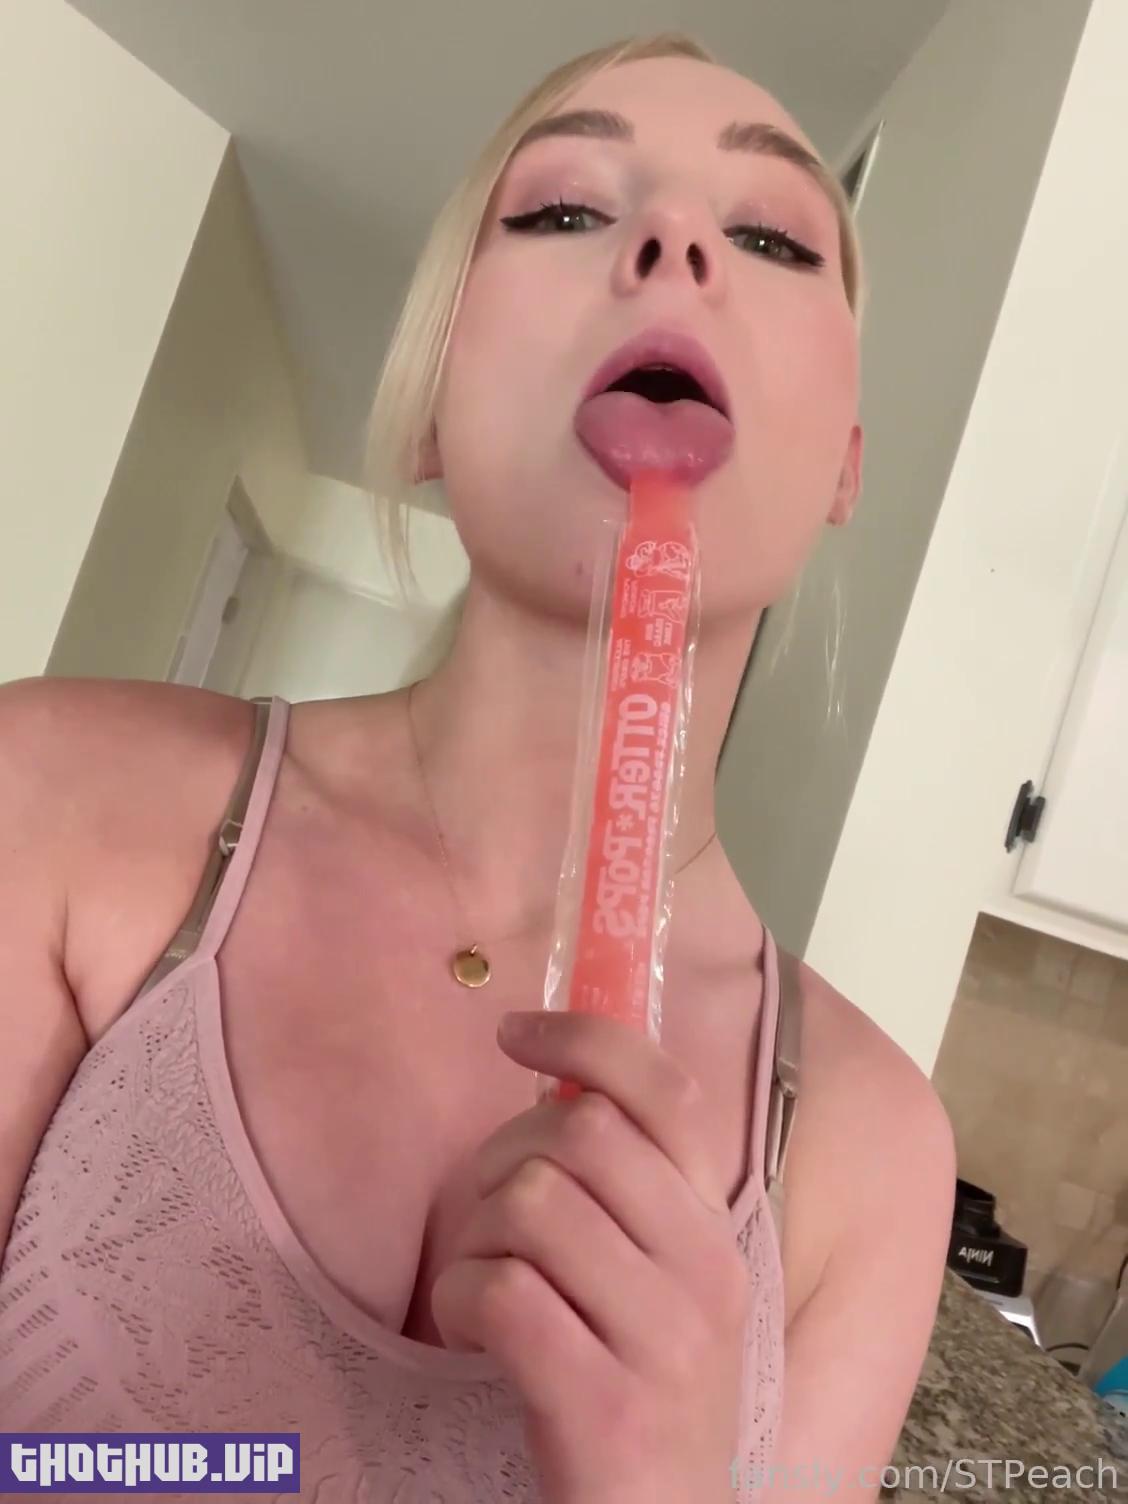 1662762069 425 STPeach Popsicle Sucking Fansly Video Leaked